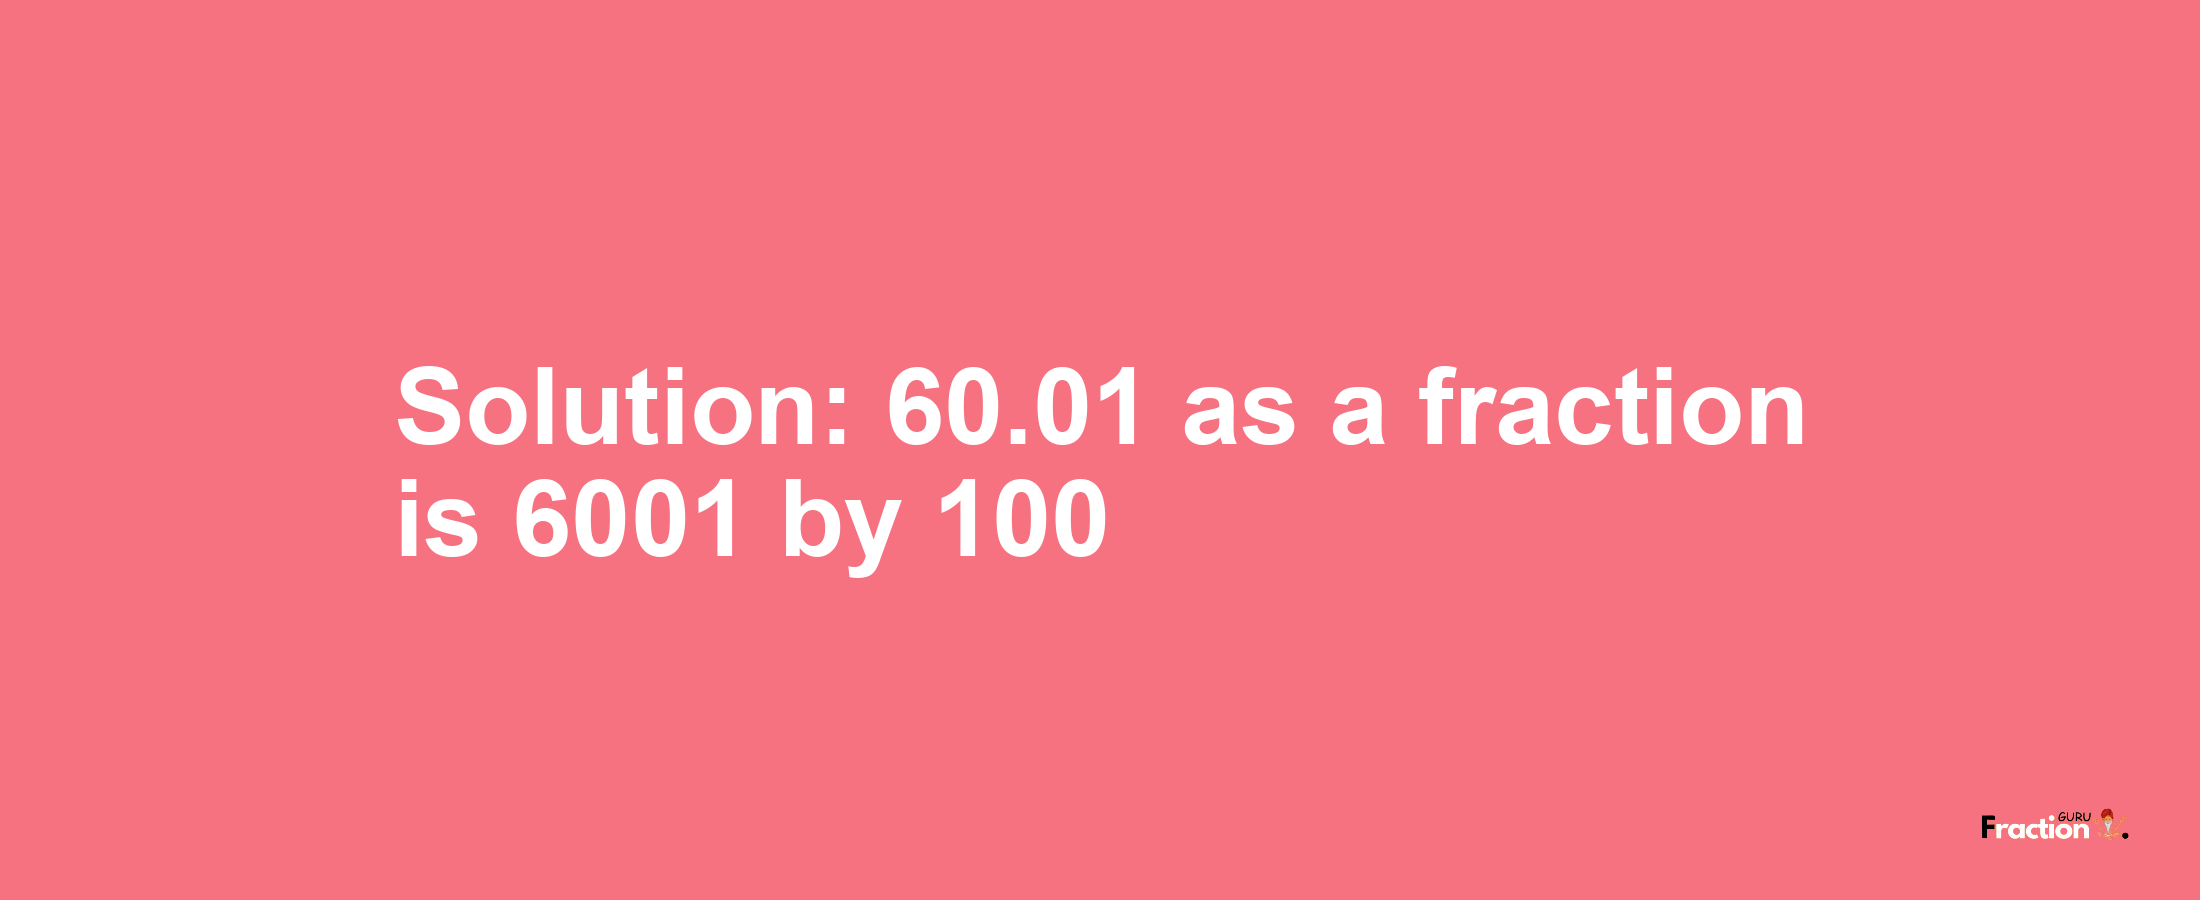 Solution:60.01 as a fraction is 6001/100